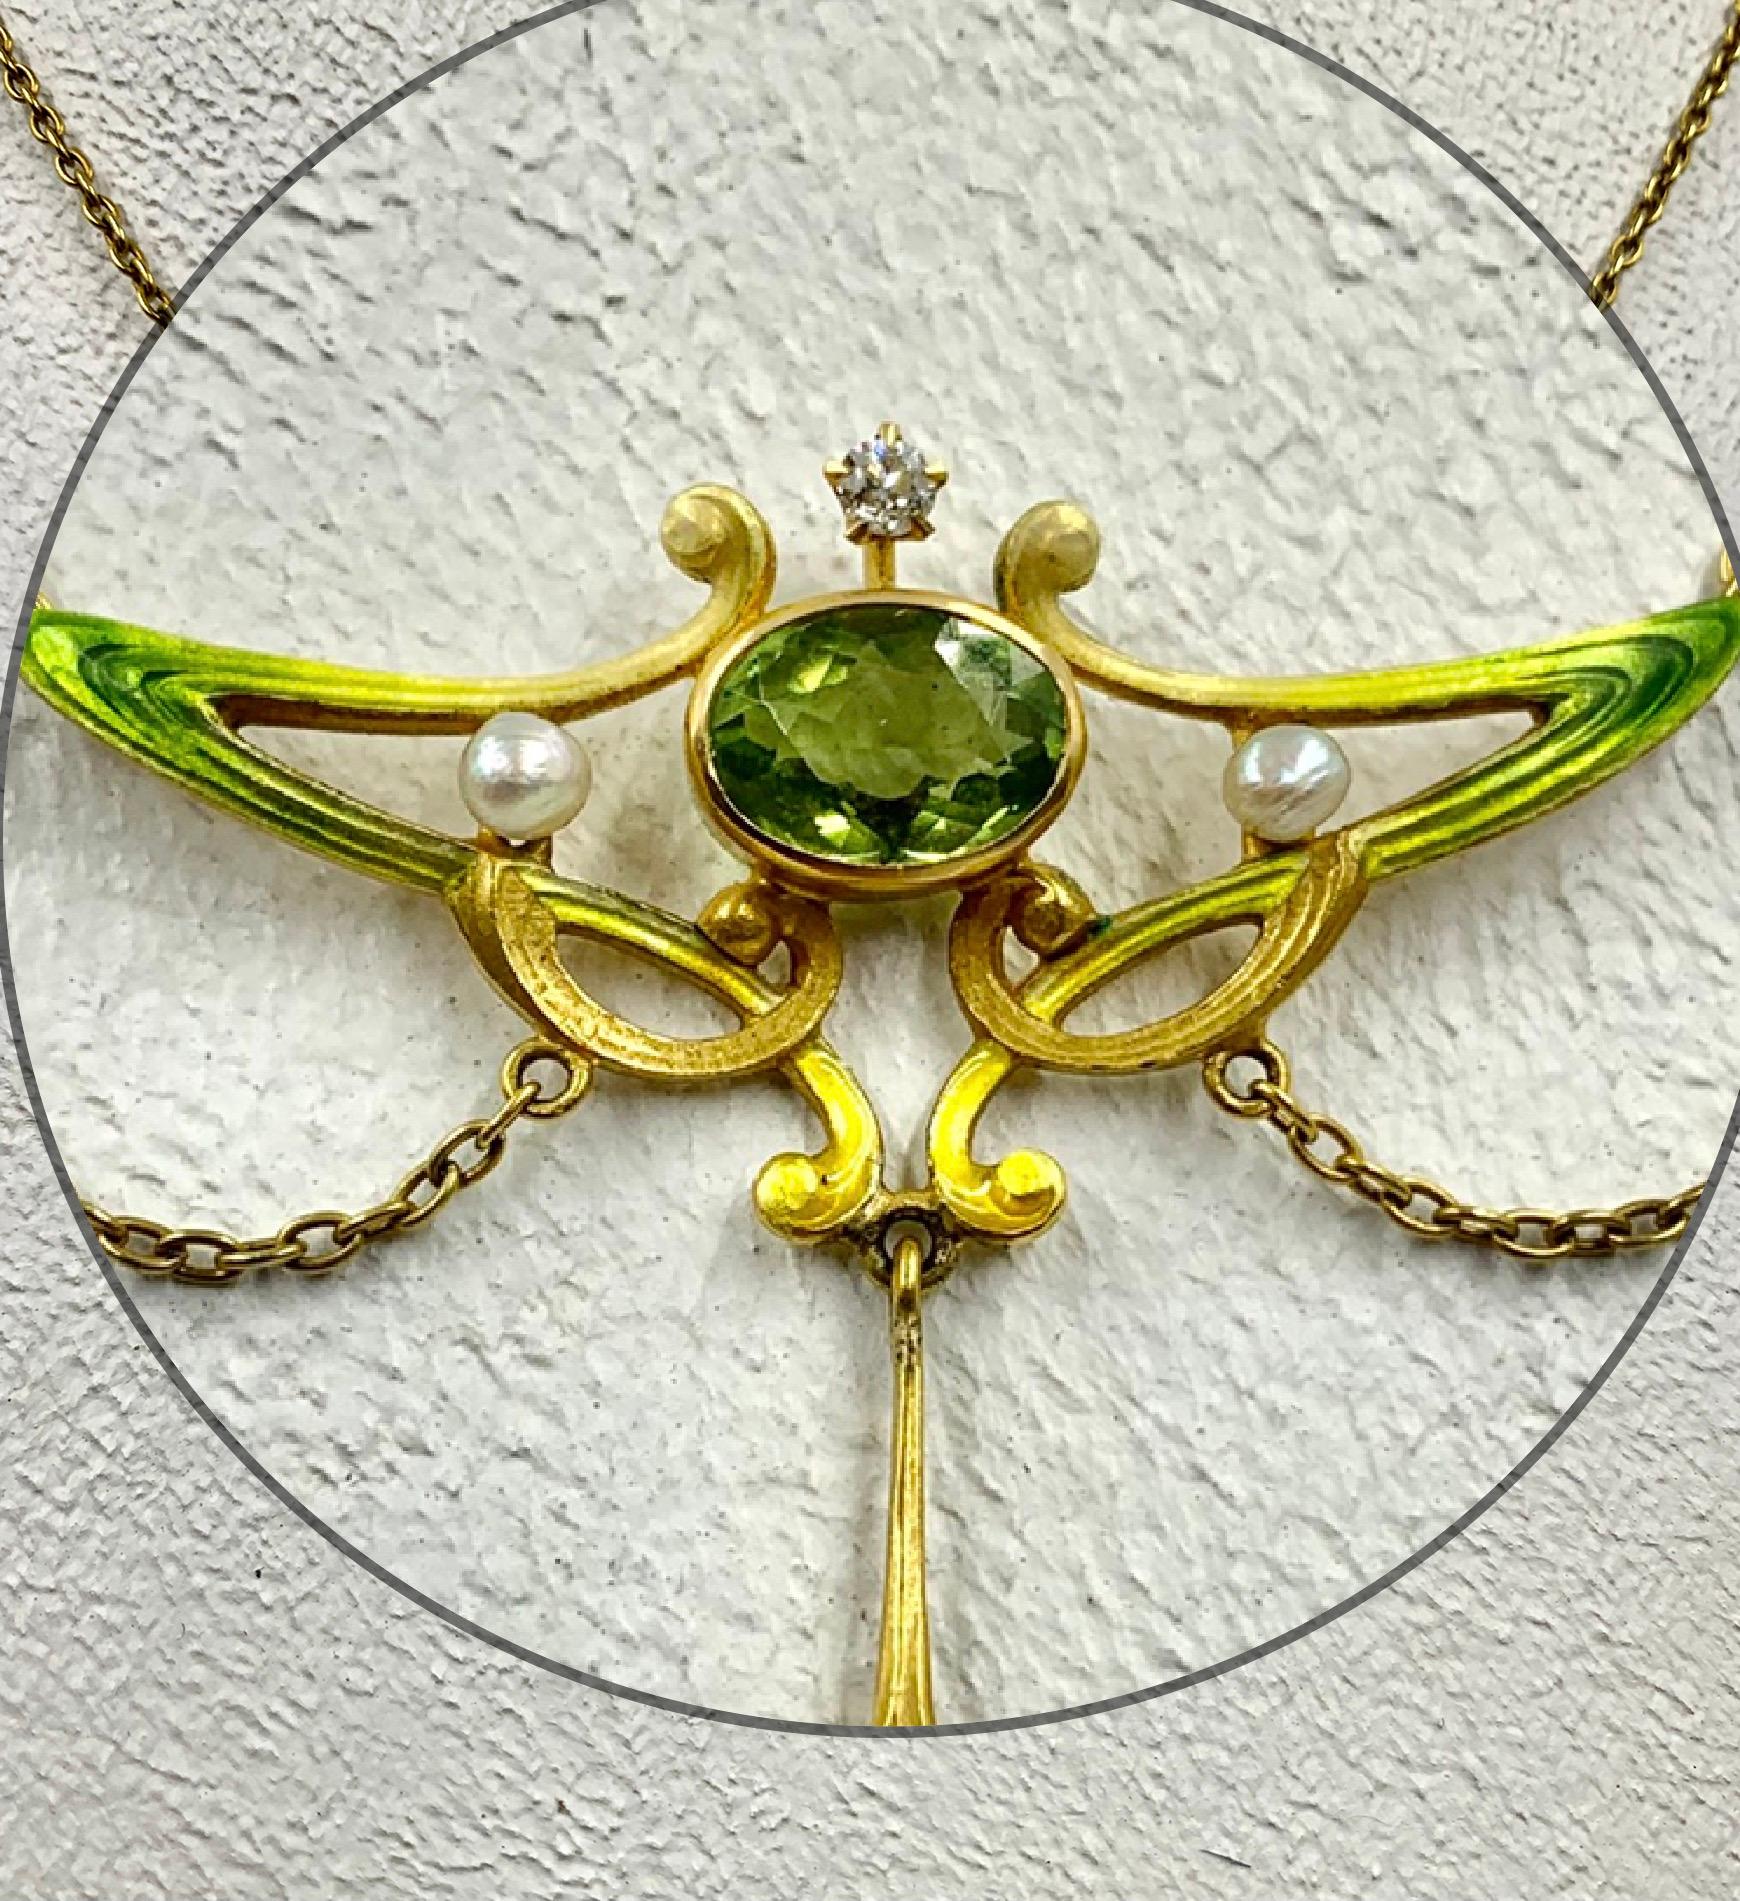 Beautiful Art Nouveau period 18K gold, Ombre enamel, faceted peridot, diamond and natural pearl necklace. With a central oval peridot measuring 9mm by 6mm, surrounded by fine stylized Art Nouveau undulating asymmetrical designs in ombre enamel